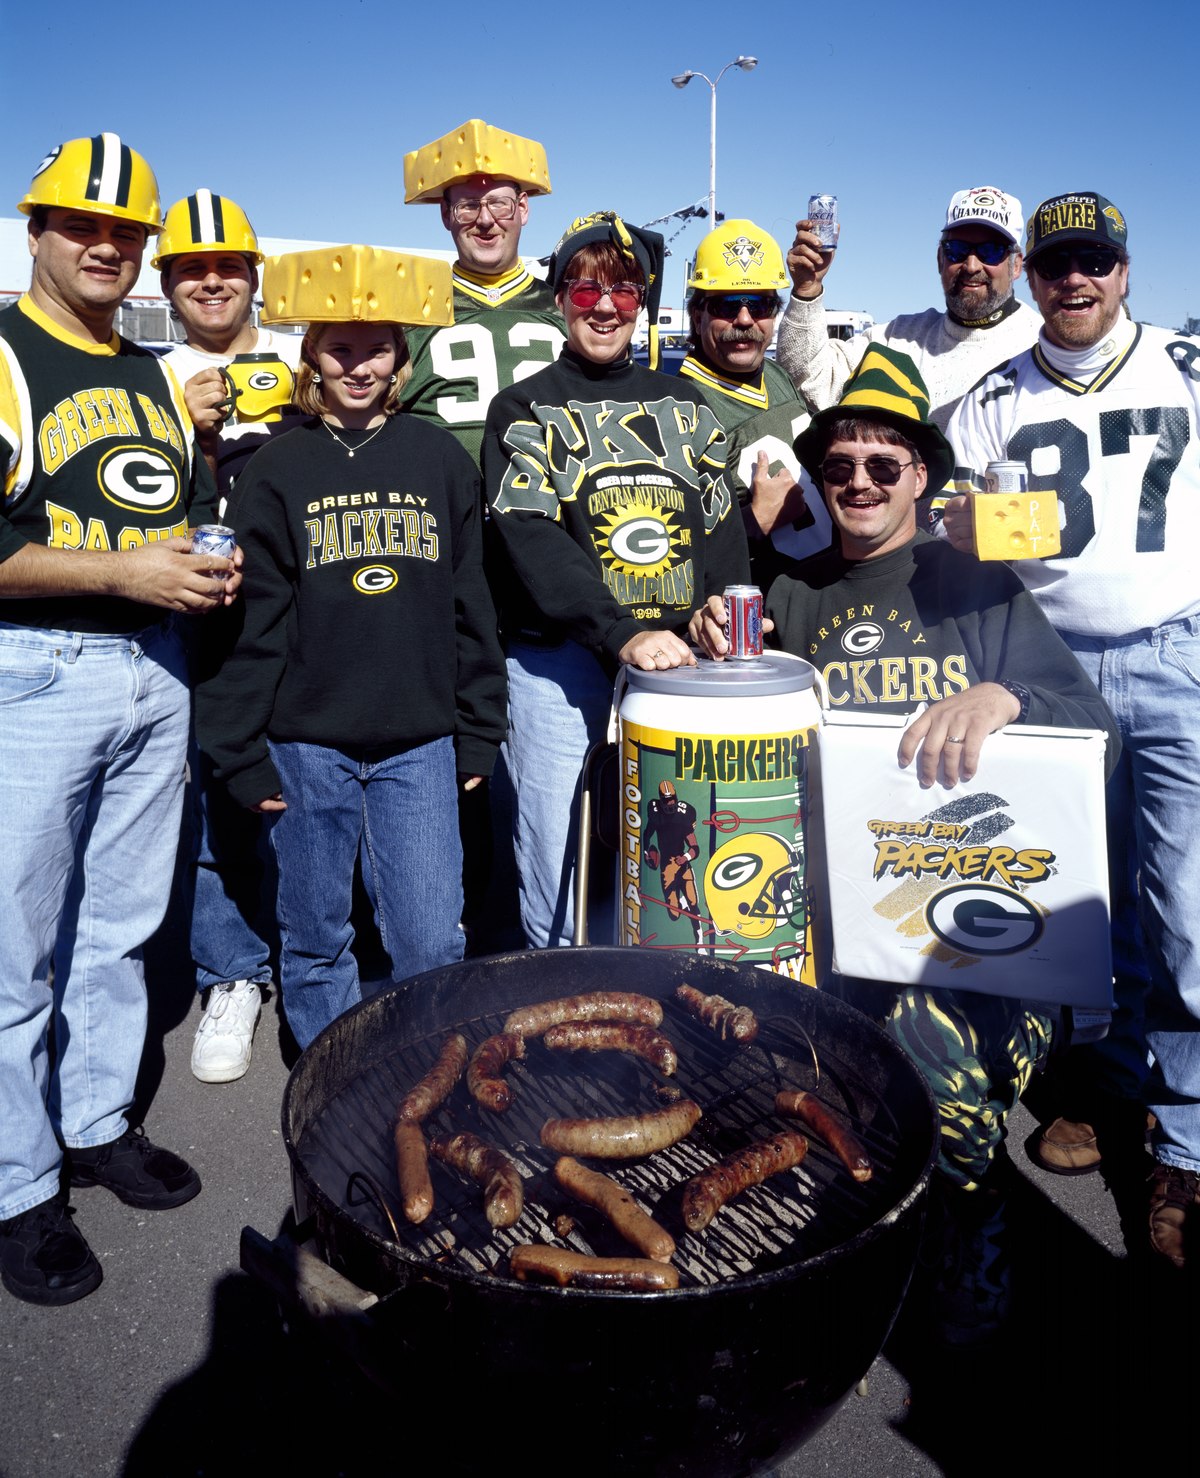 Fans in NFL merchandise, cheering on the Green Bay Packers